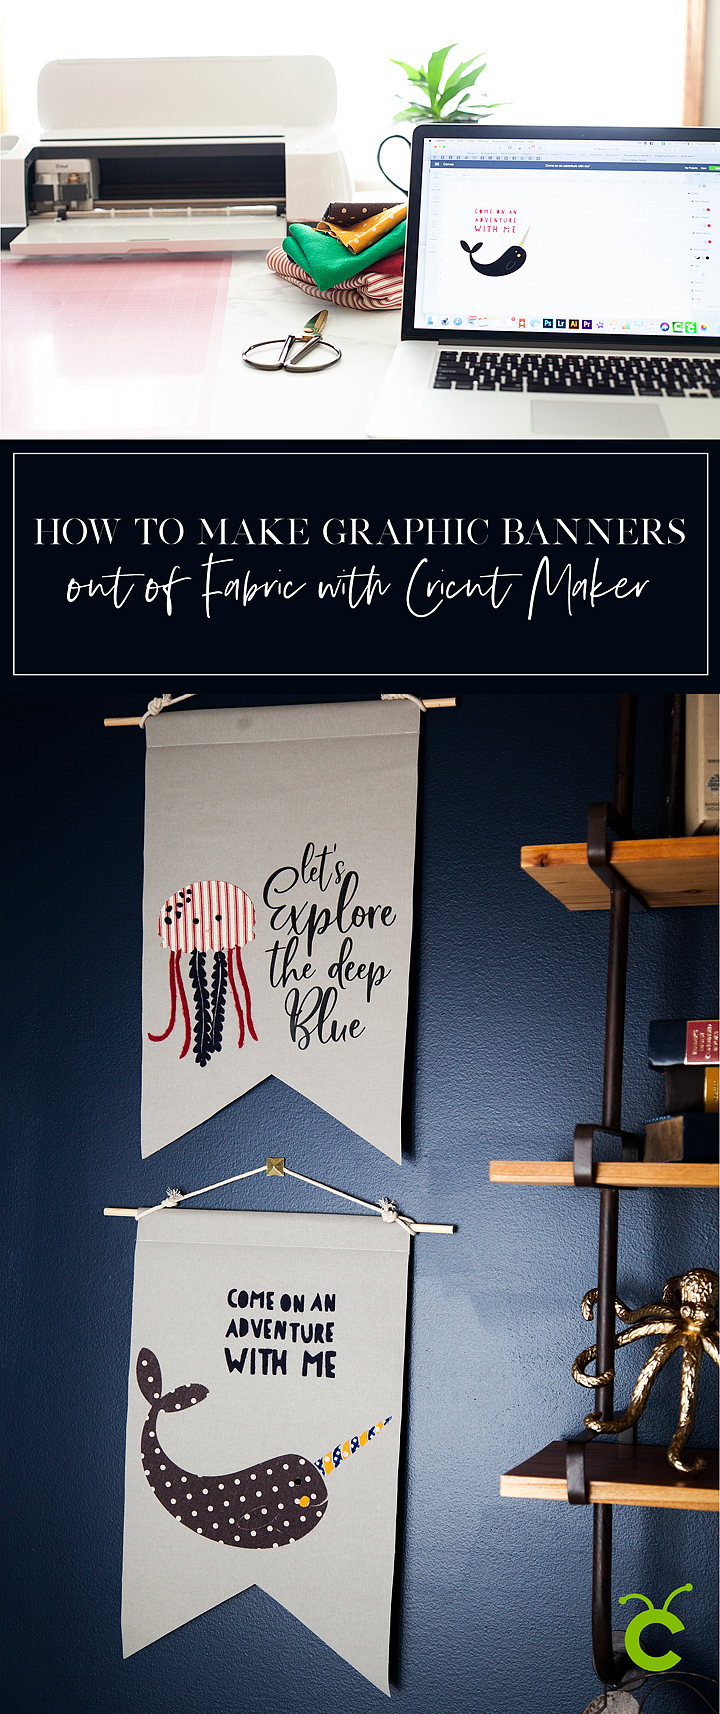 How to Create Graphic Banners with Fabric • They are easy to make with the Cricut Maker and have such impact in your room or for a party. Come learn how easy they are to make at whipperBerry.